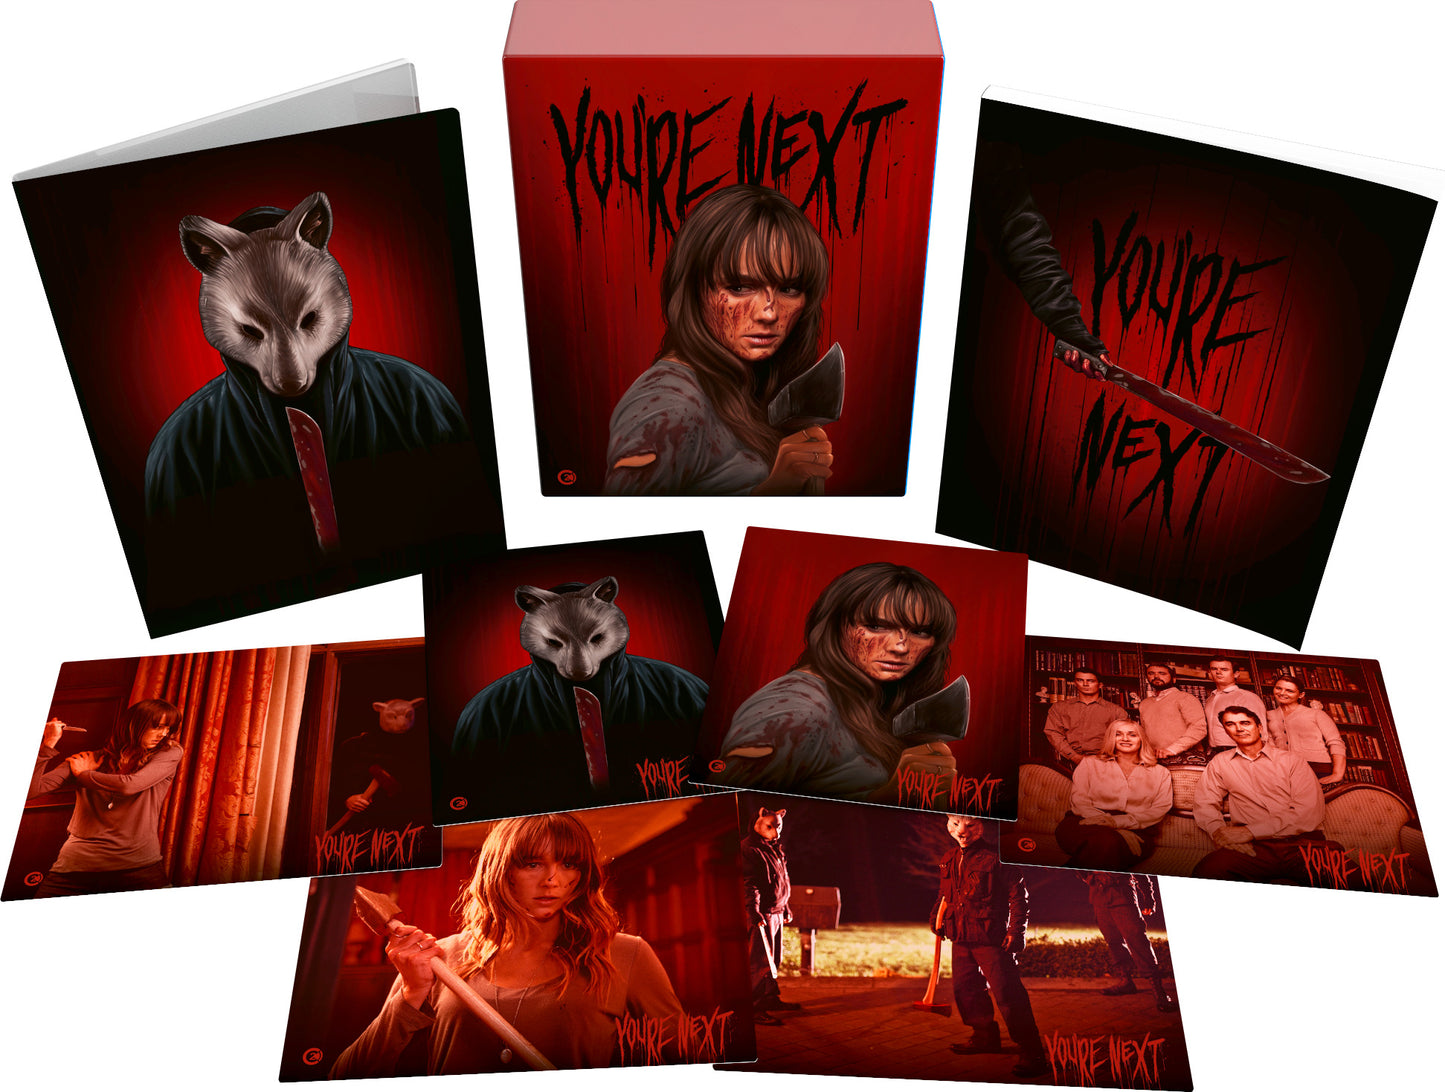 You're Next [Limited Edition] [4K UHD] [UK]